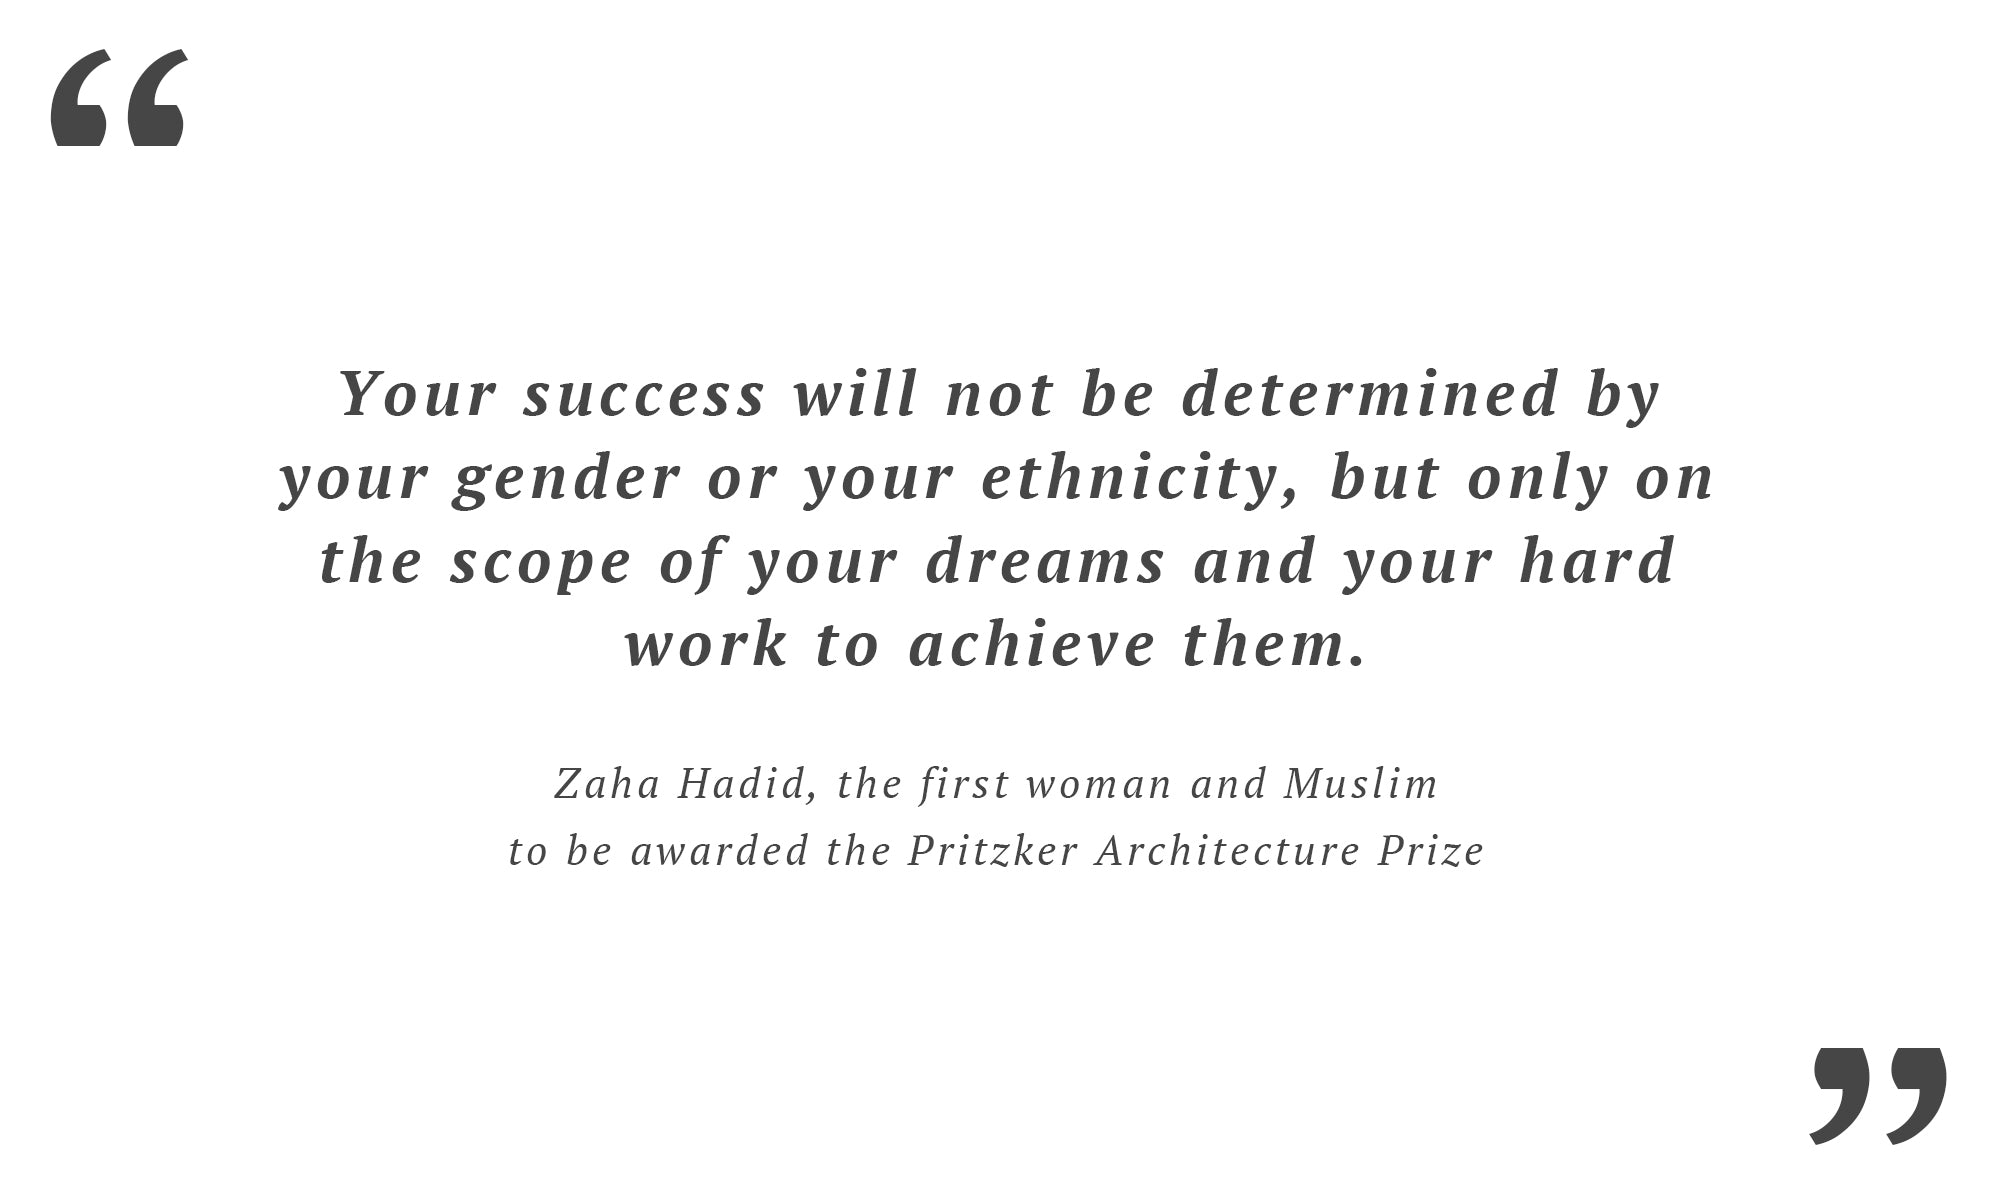 Architect Zaha Hadid quote on gender and ethnicity - Wingback